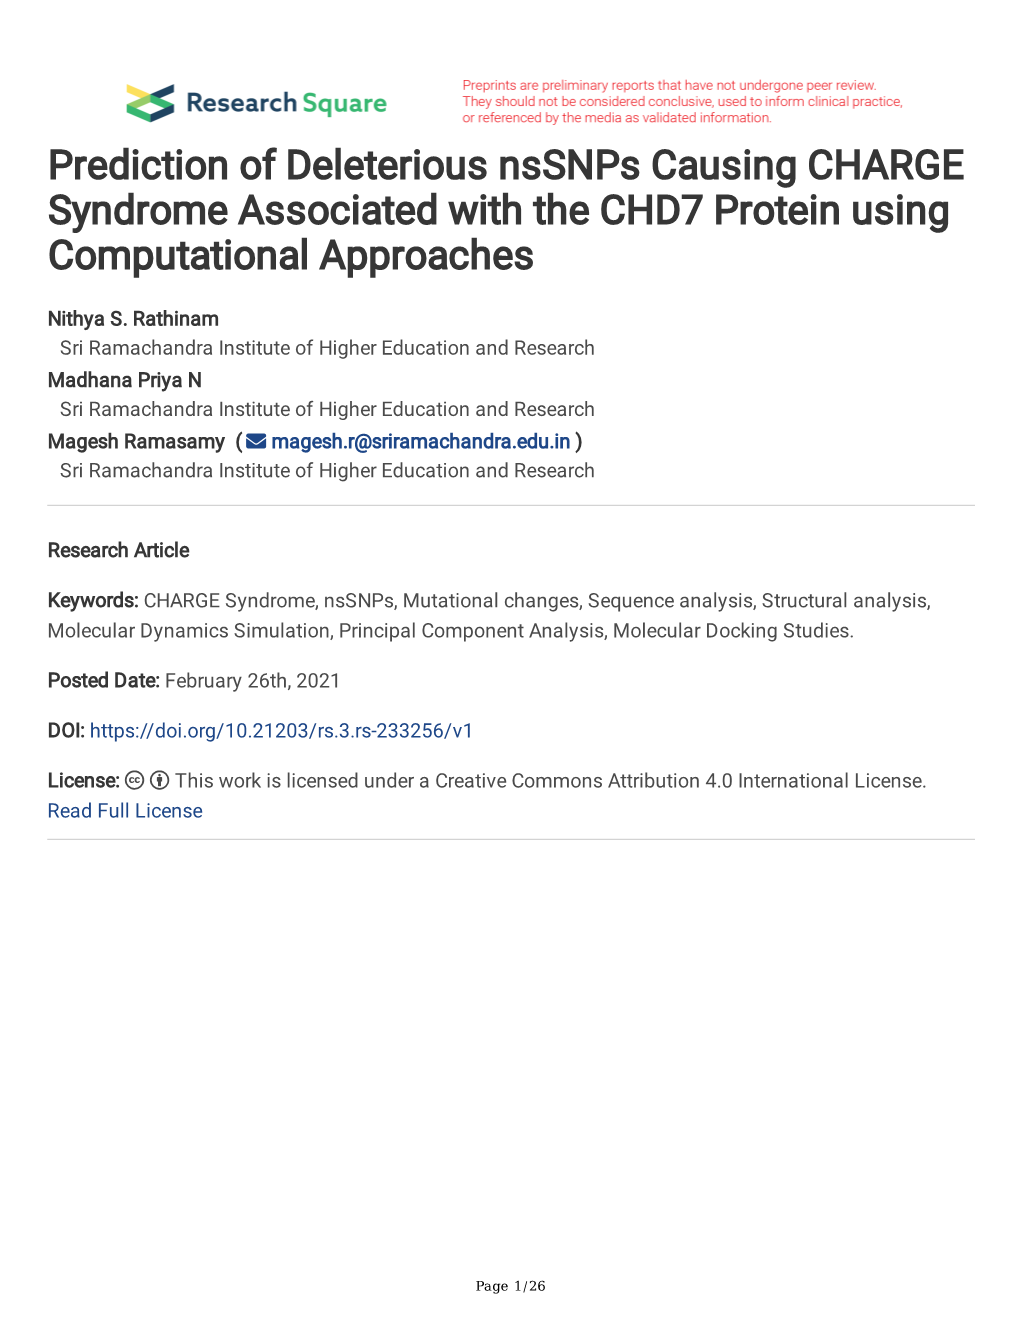 Prediction of Deleterious Nssnps Causing CHARGE Syndrome Associated with the CHD7 Protein Using Computational Approaches